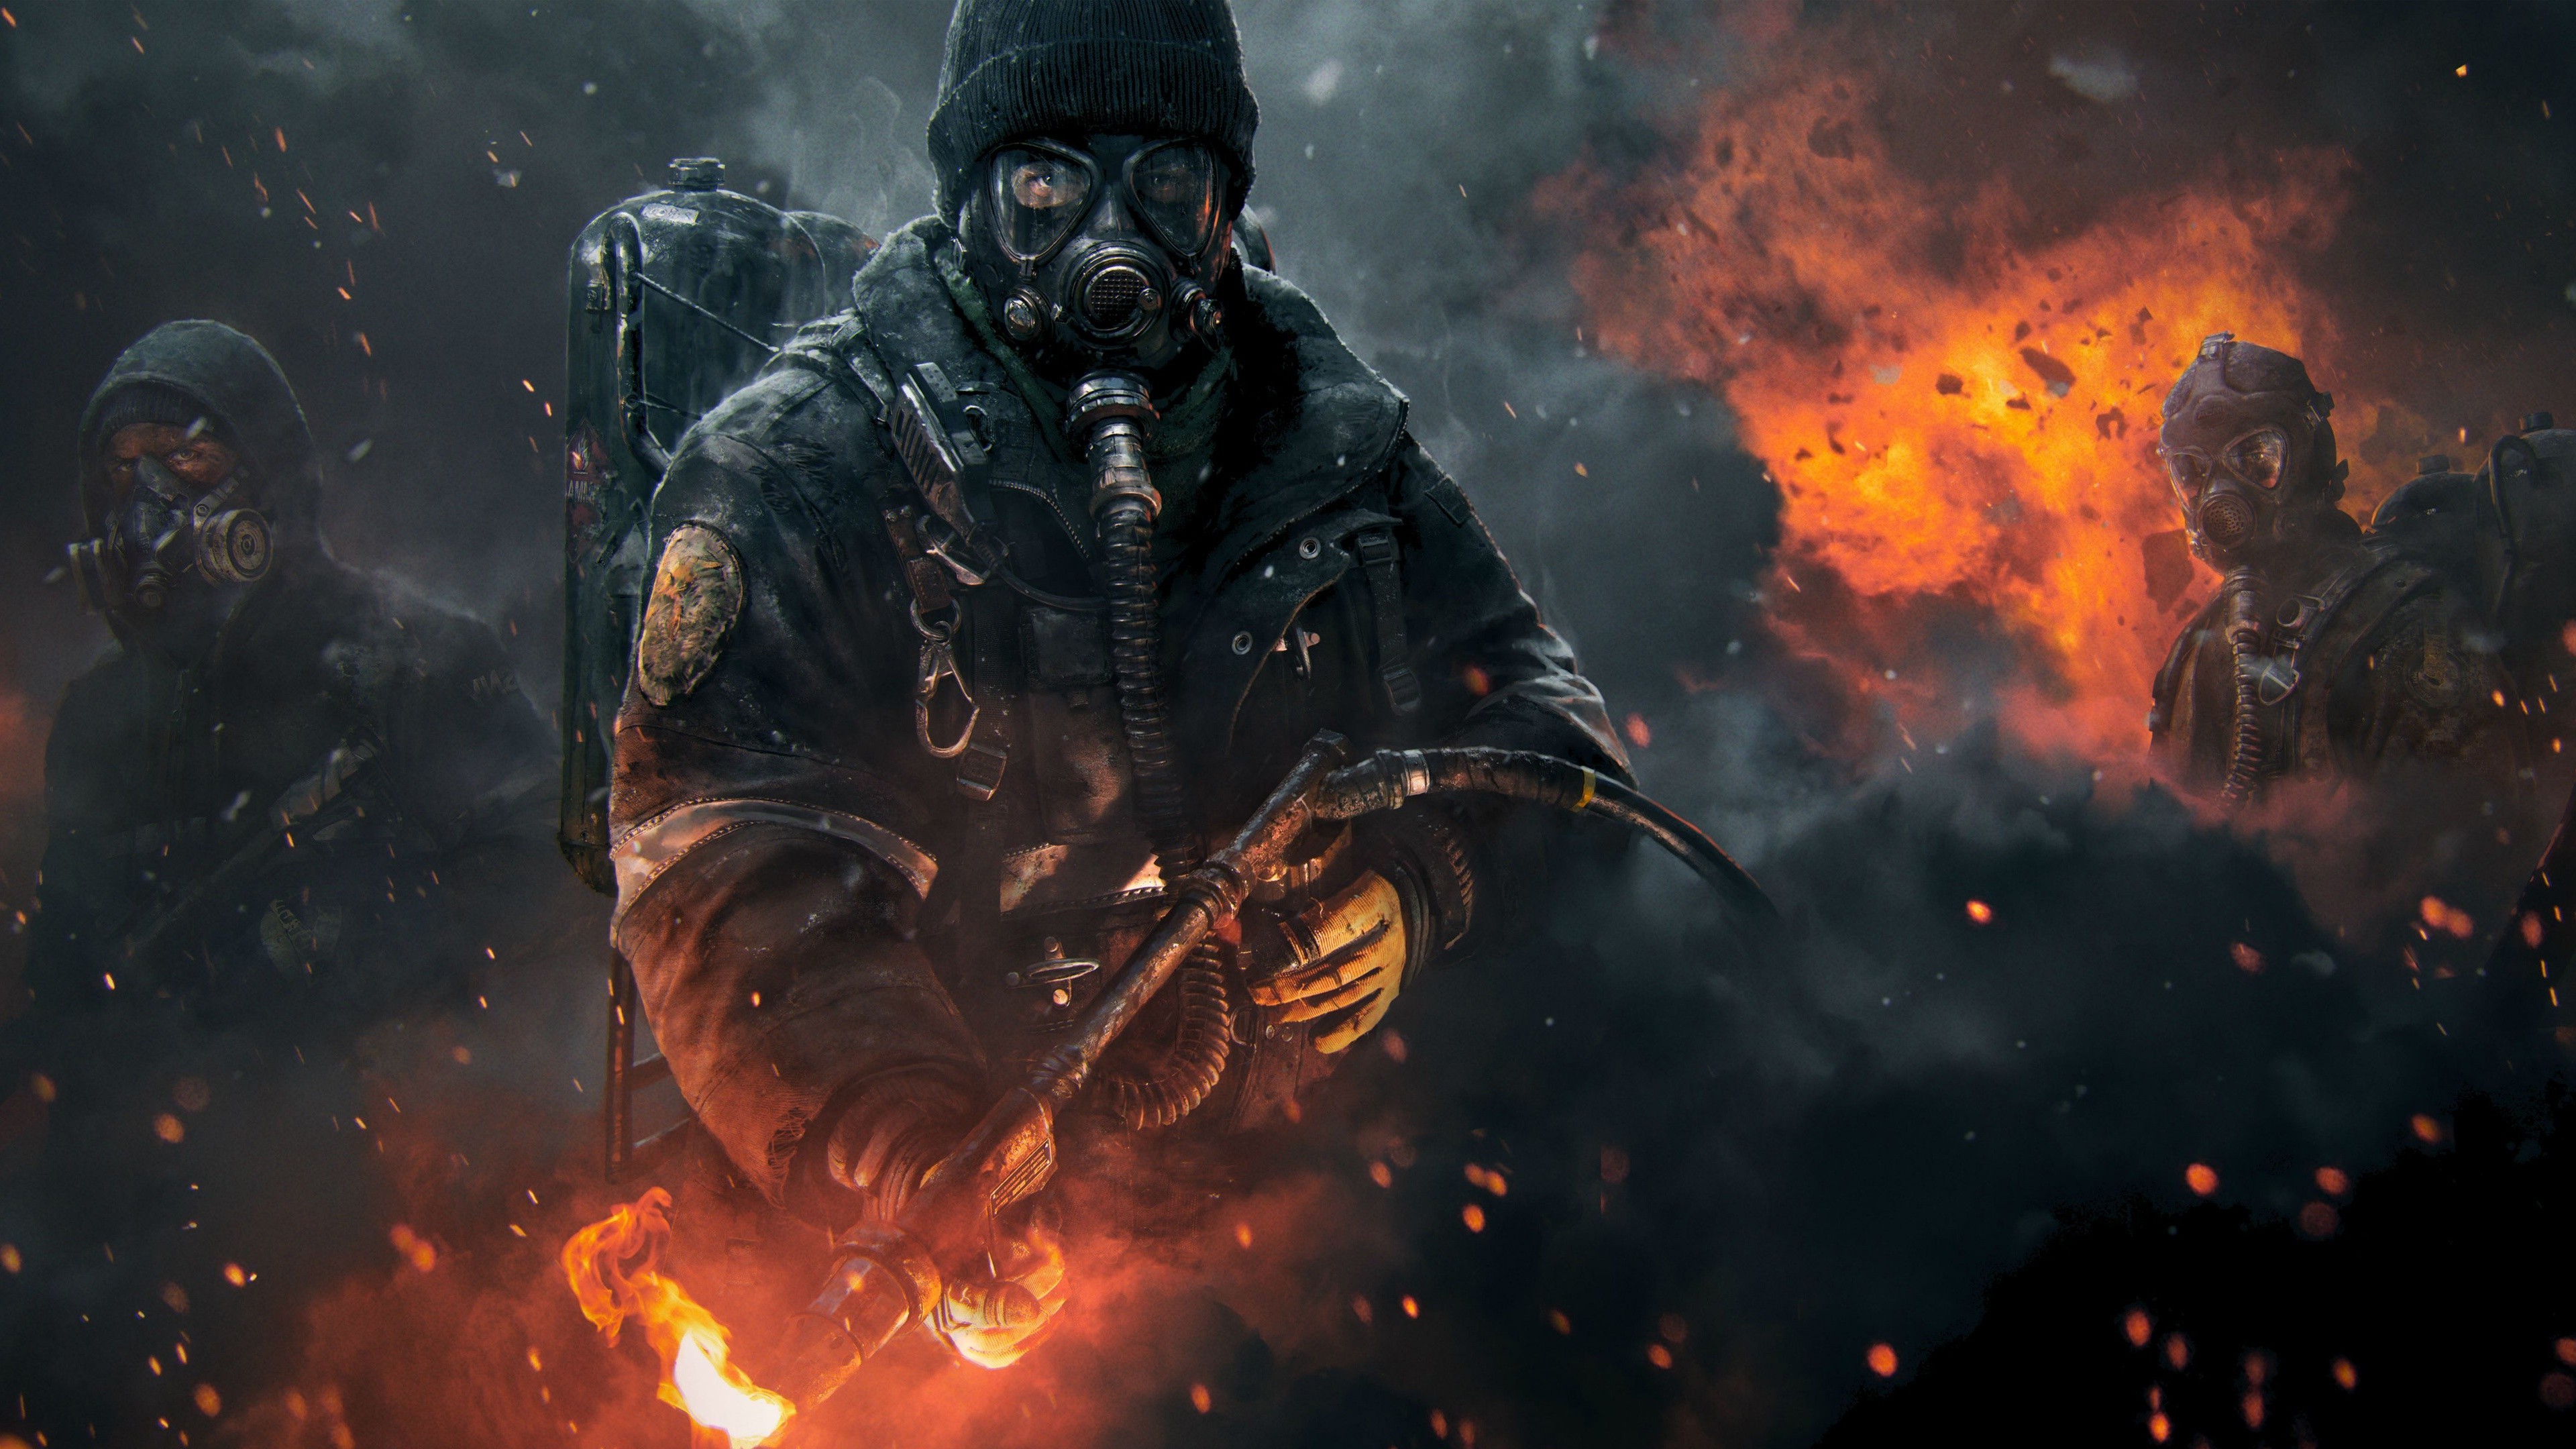 tom clancy the division pc kickass